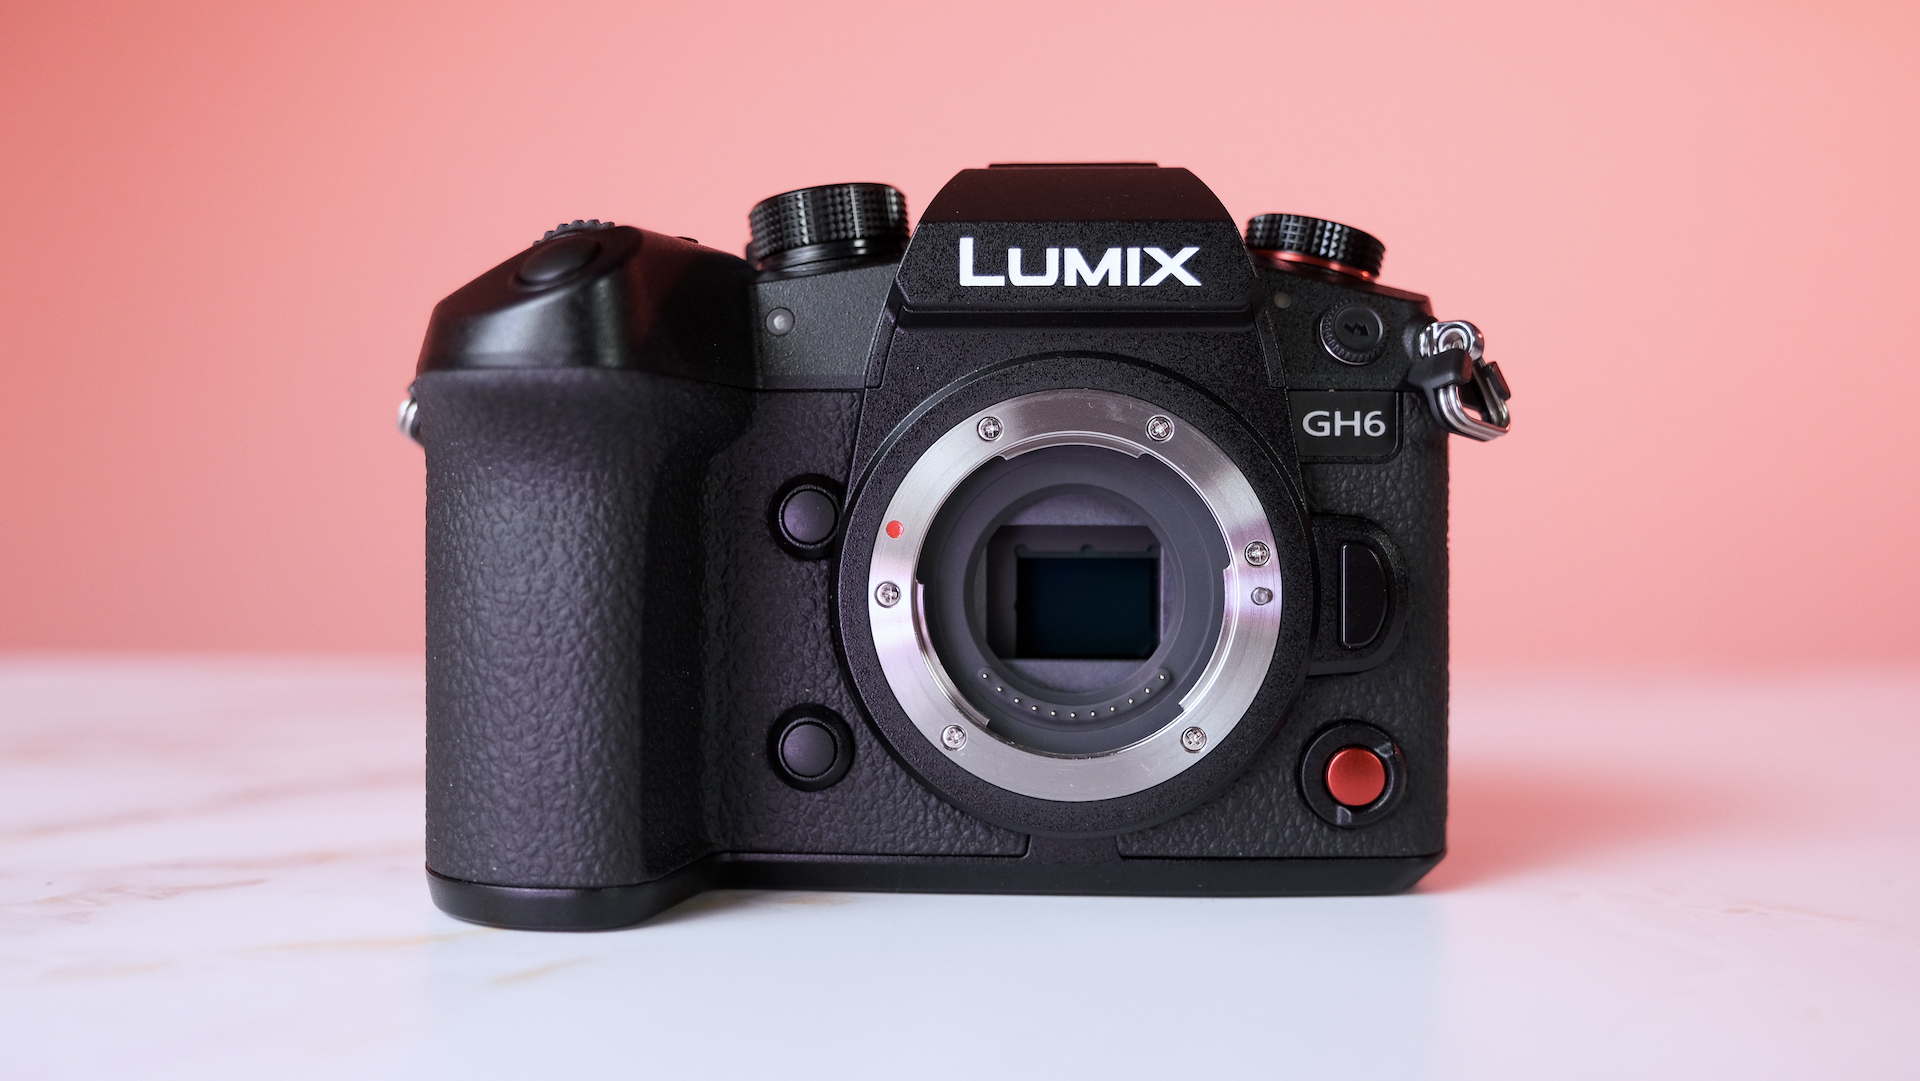 Panasonic LUMIX GH6 Firmware Version 2.0 - Now Available for 